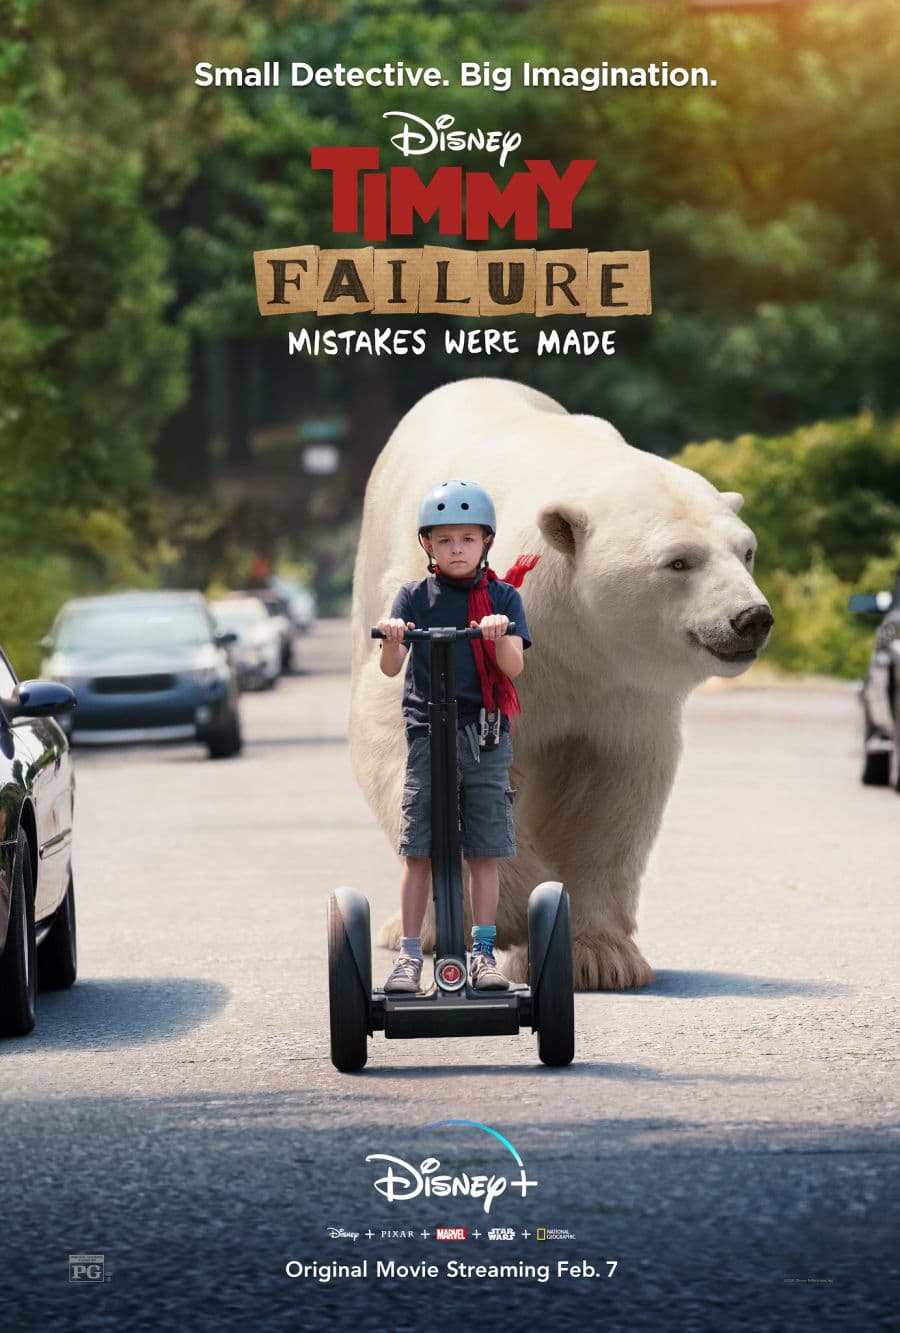 Timmy Failure Mistakes were Made Movie Poster in the Timmy Failure parents guide post